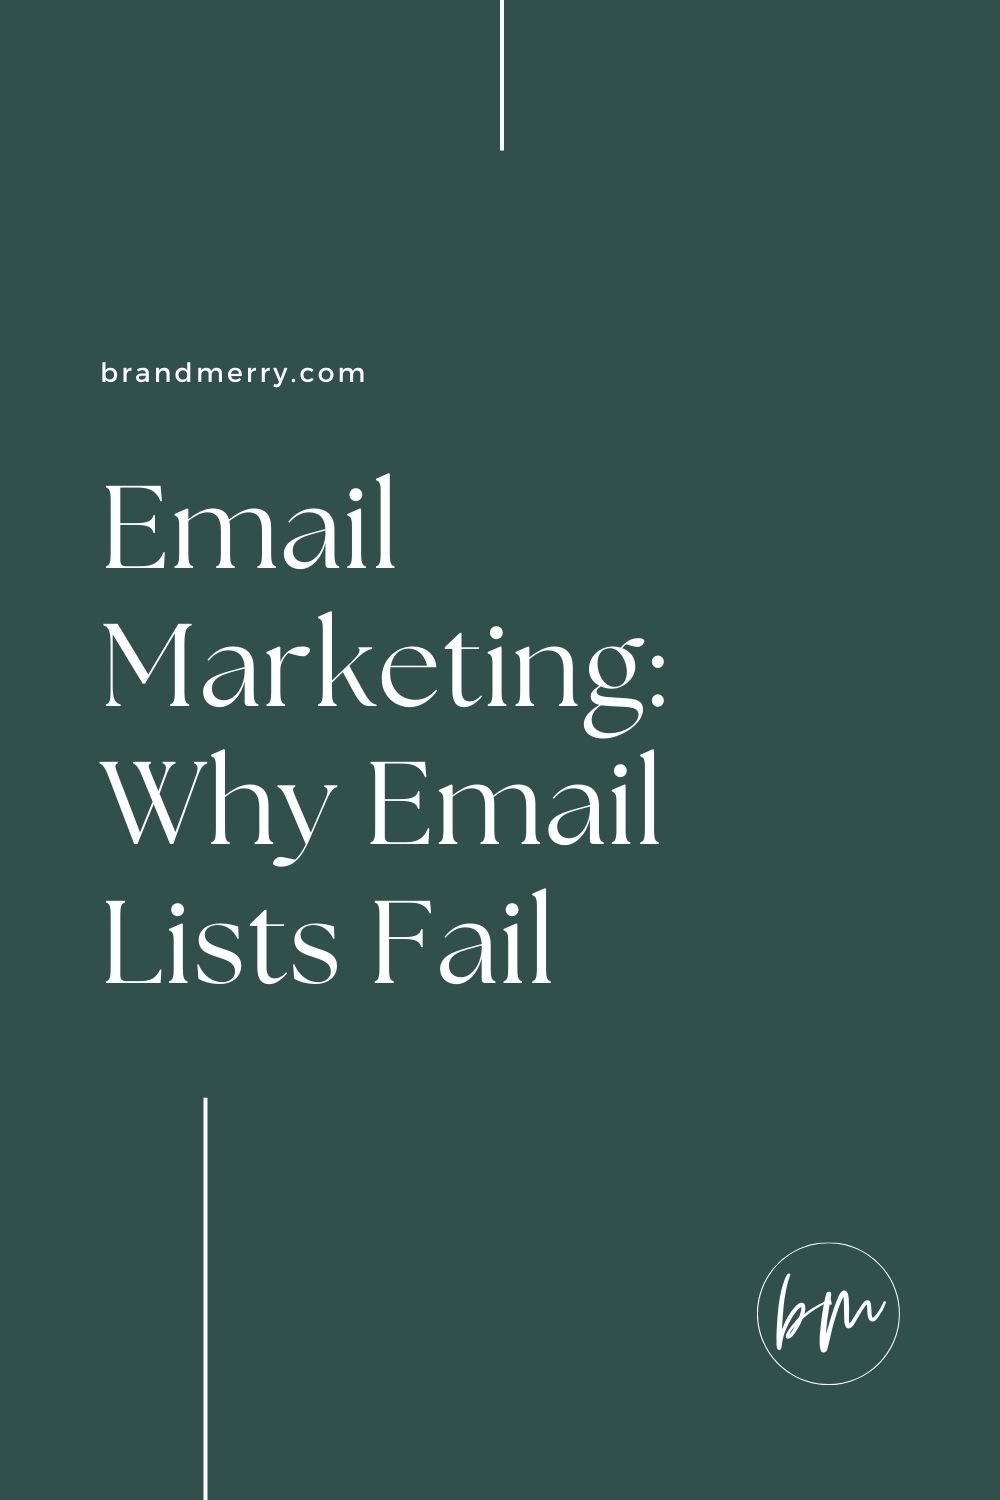 Email Marketing: Why Email Lists Fail — Brand Coach | Branding Coach ...